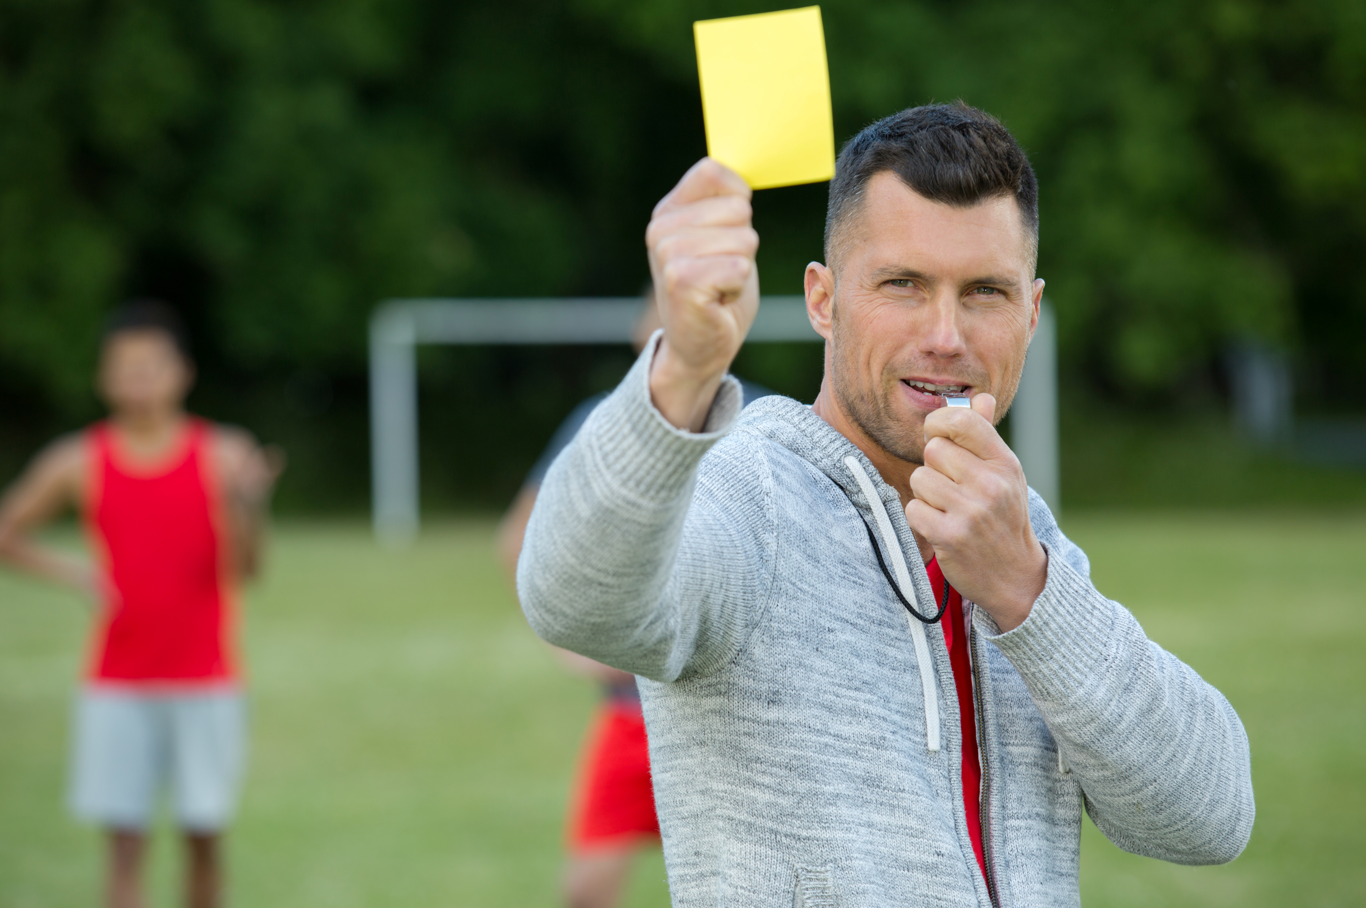 The Auditor as Referee